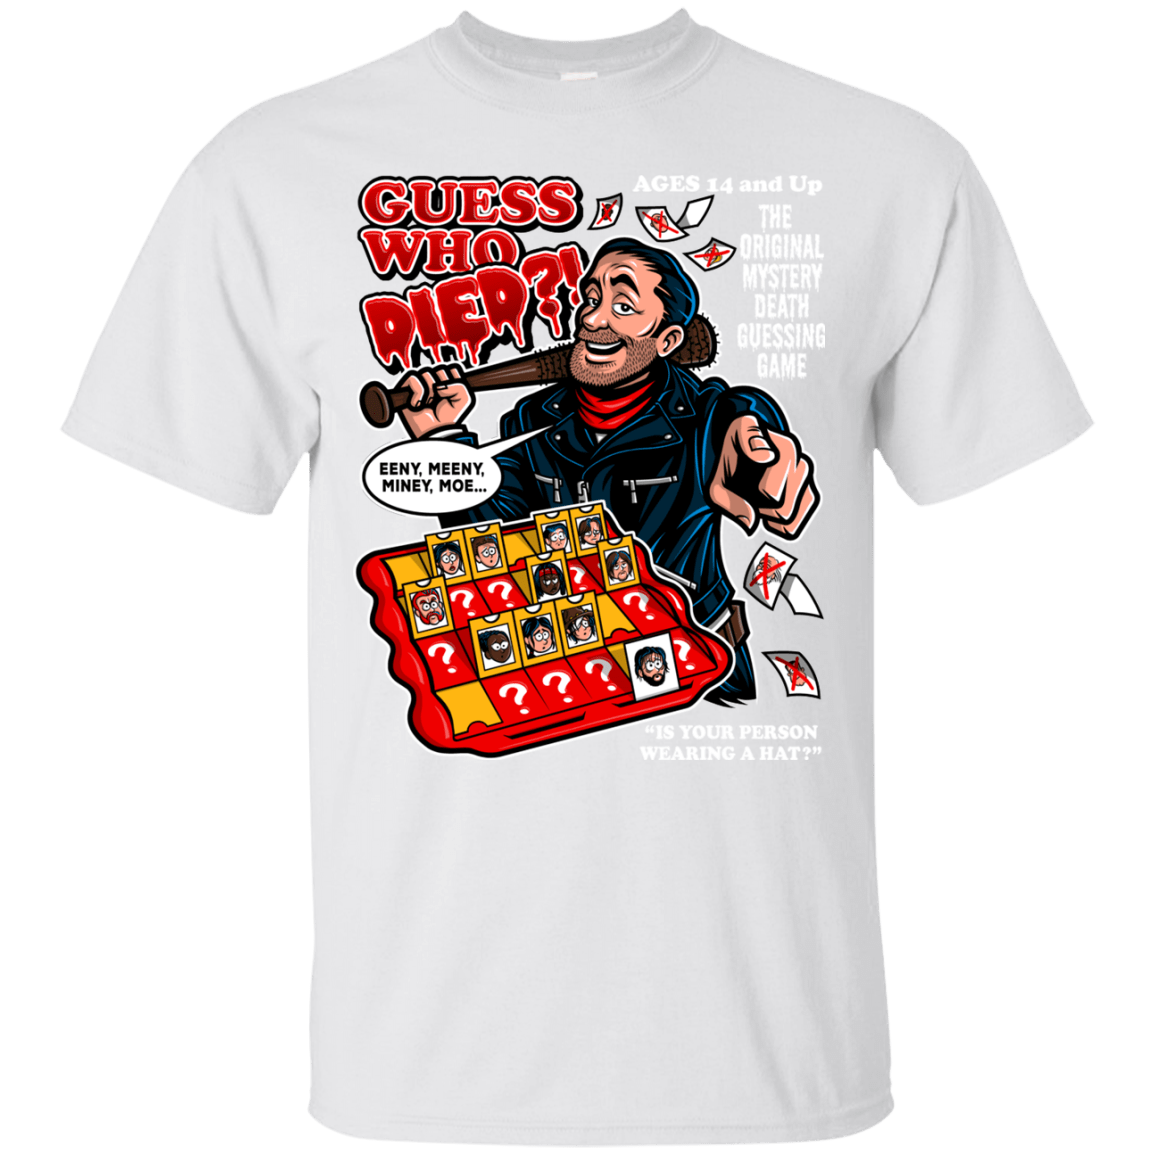 T-Shirts Guess who Died T-Shirt